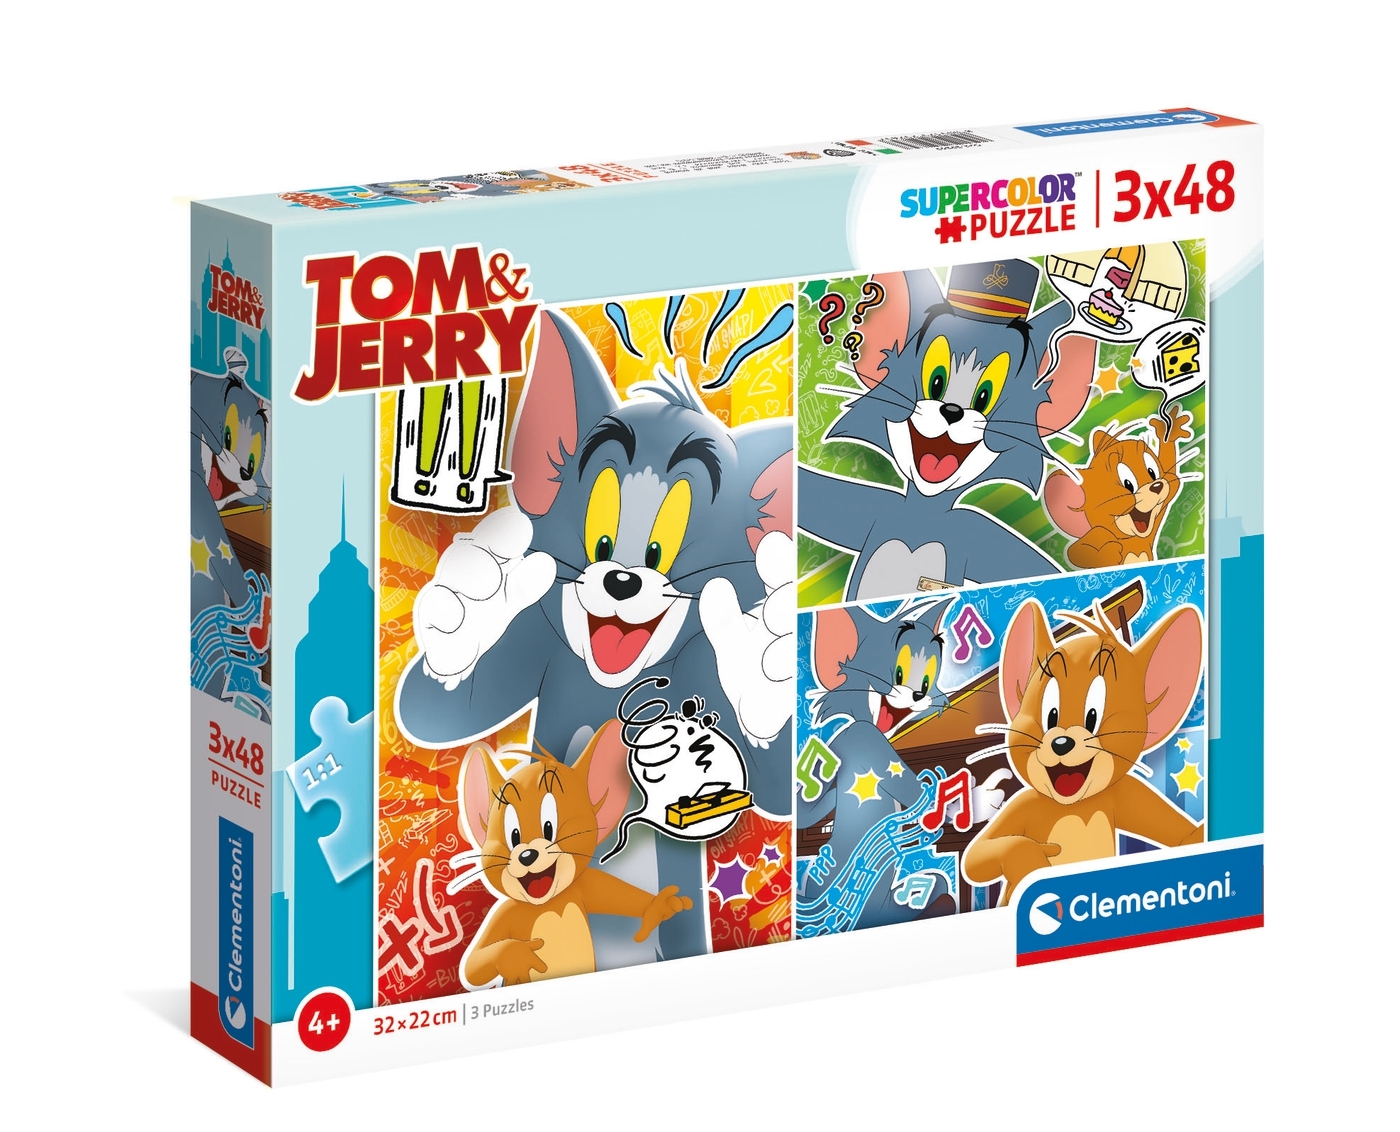 Puzzle SuperColor 3x48: Tom and Jerry (25265)